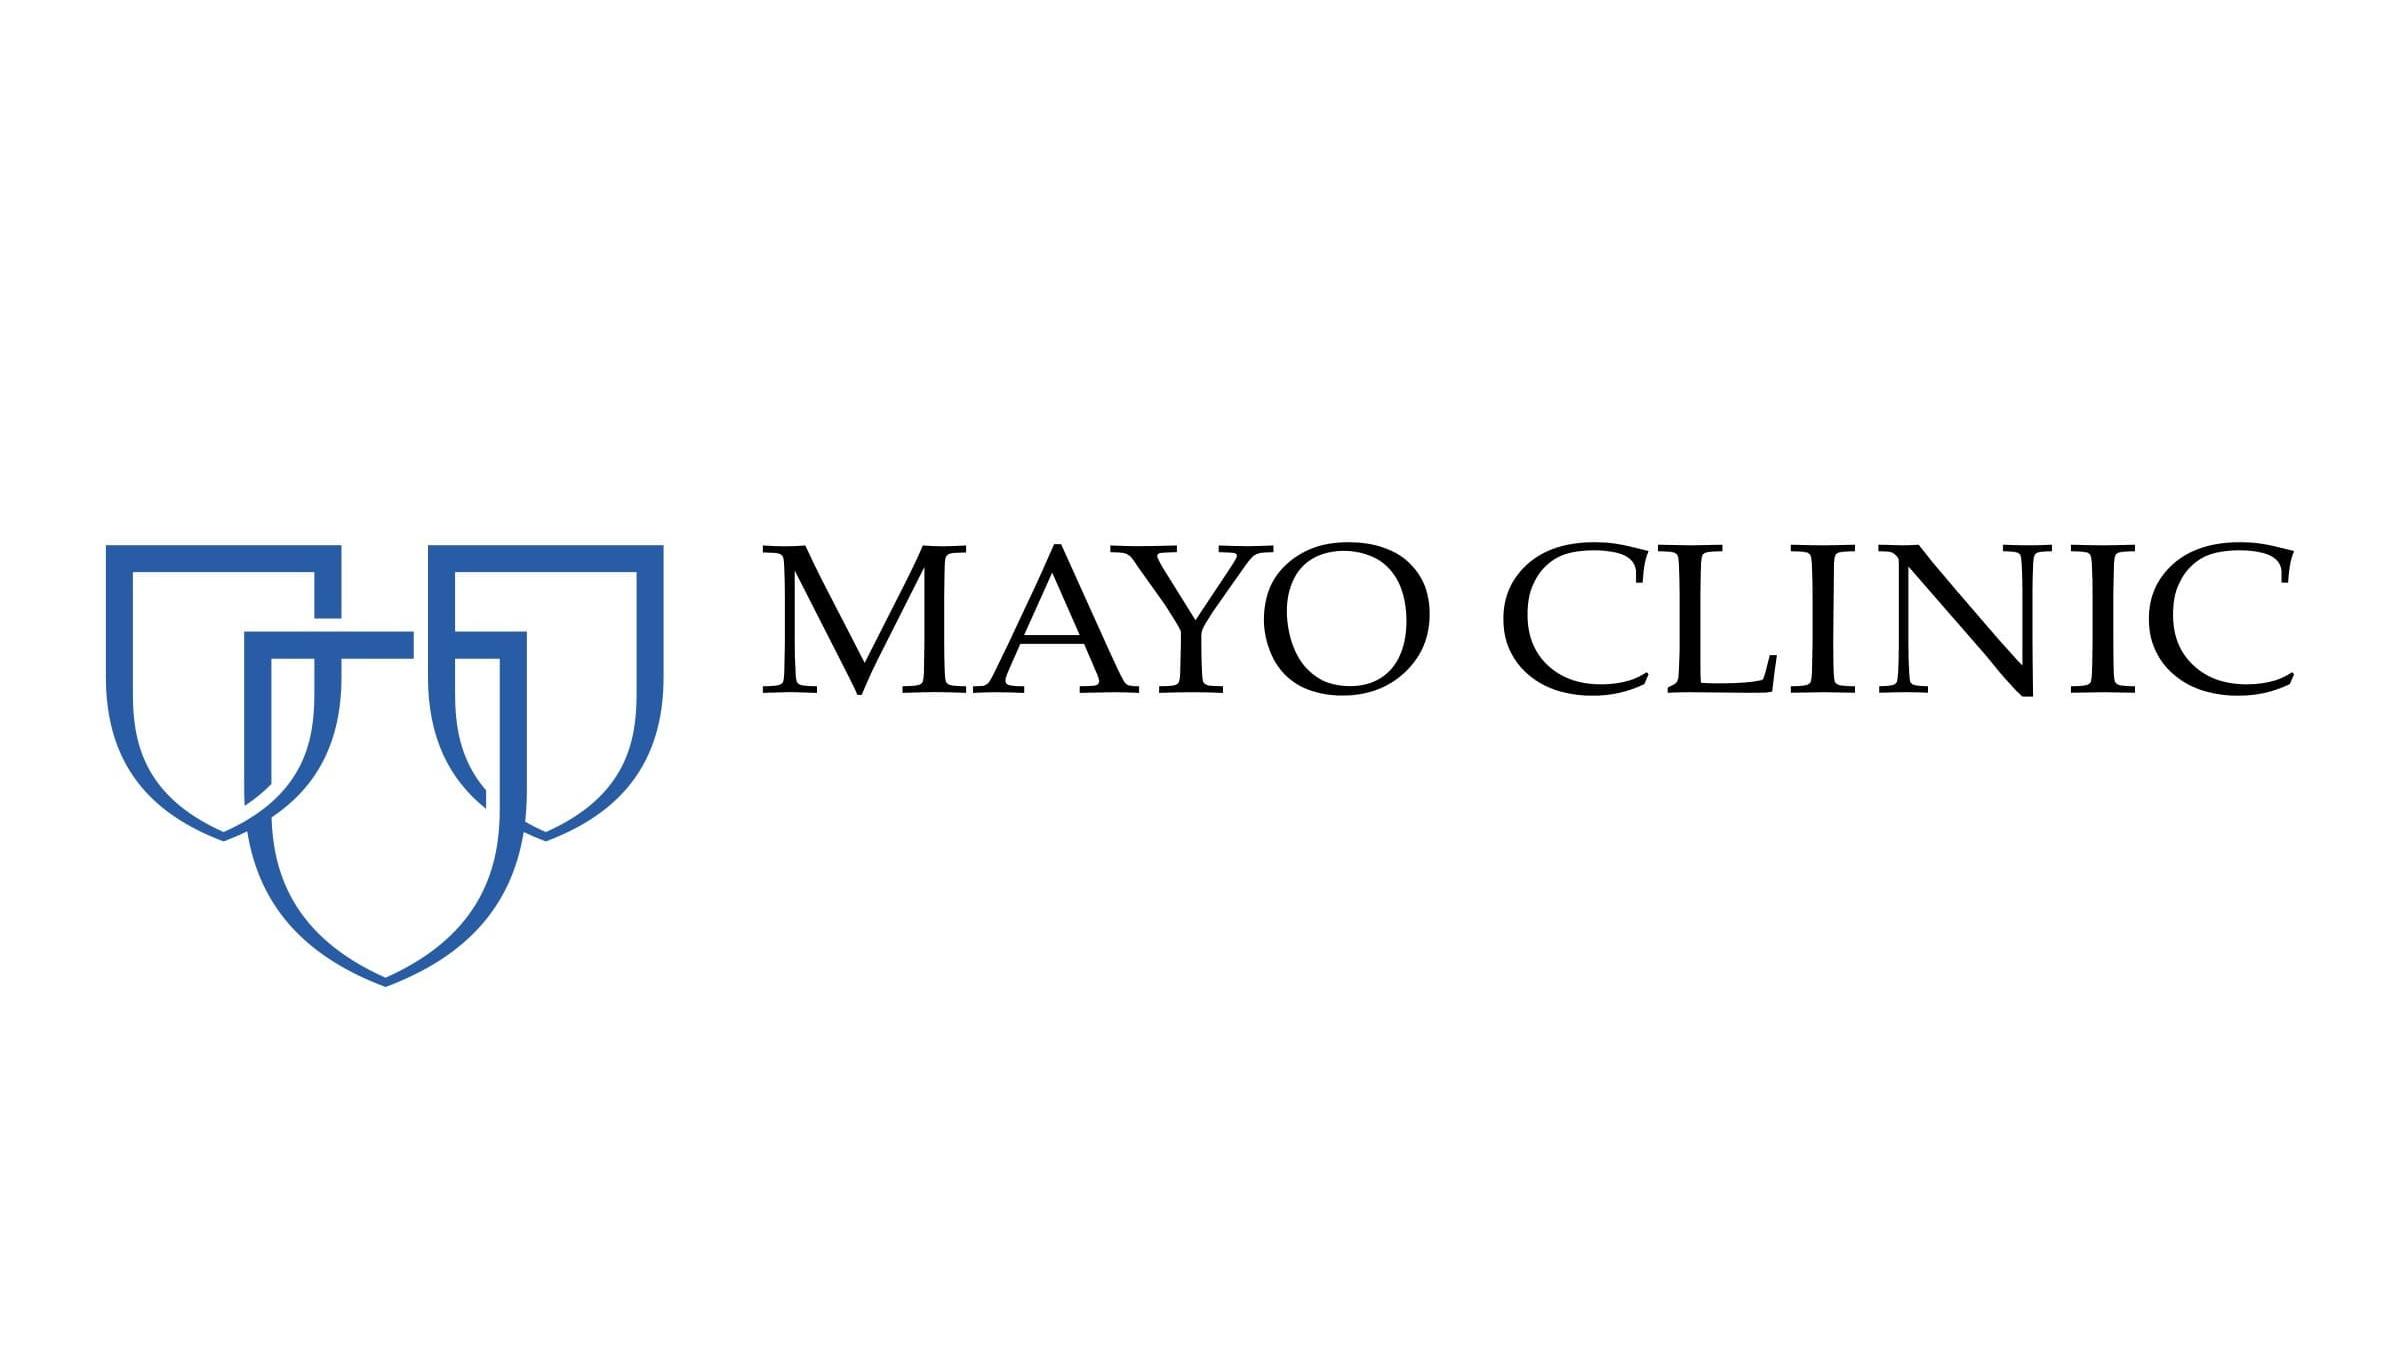 The logo for the Mayo Clinic